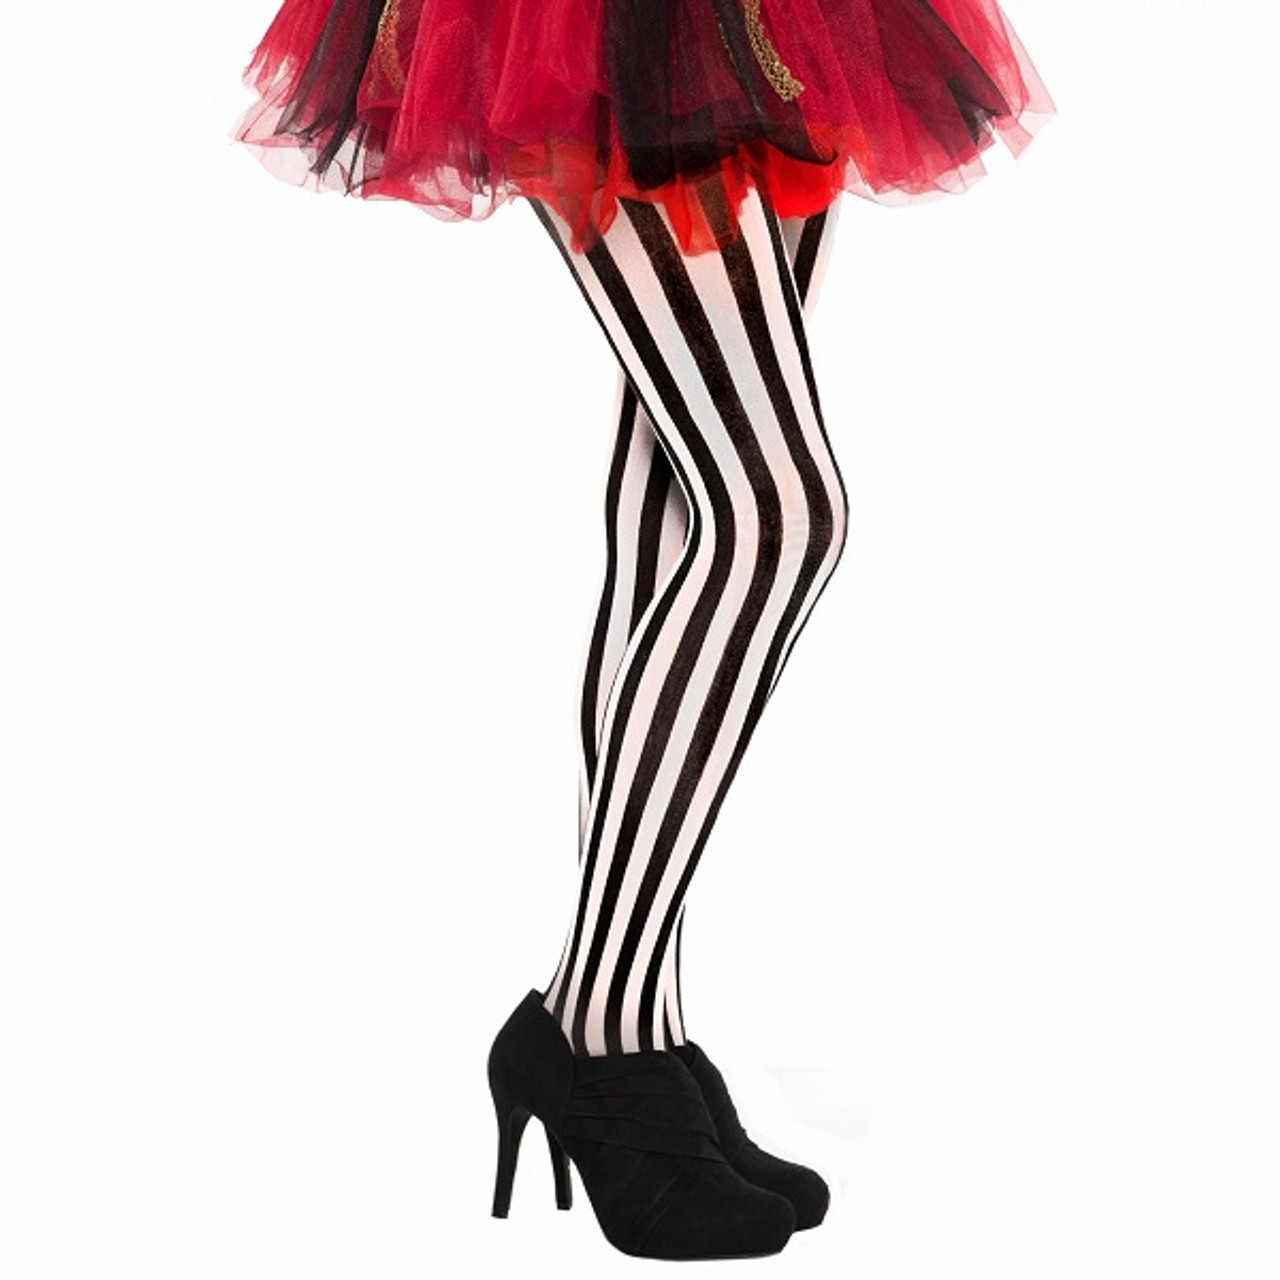 Vertical Striped Tights